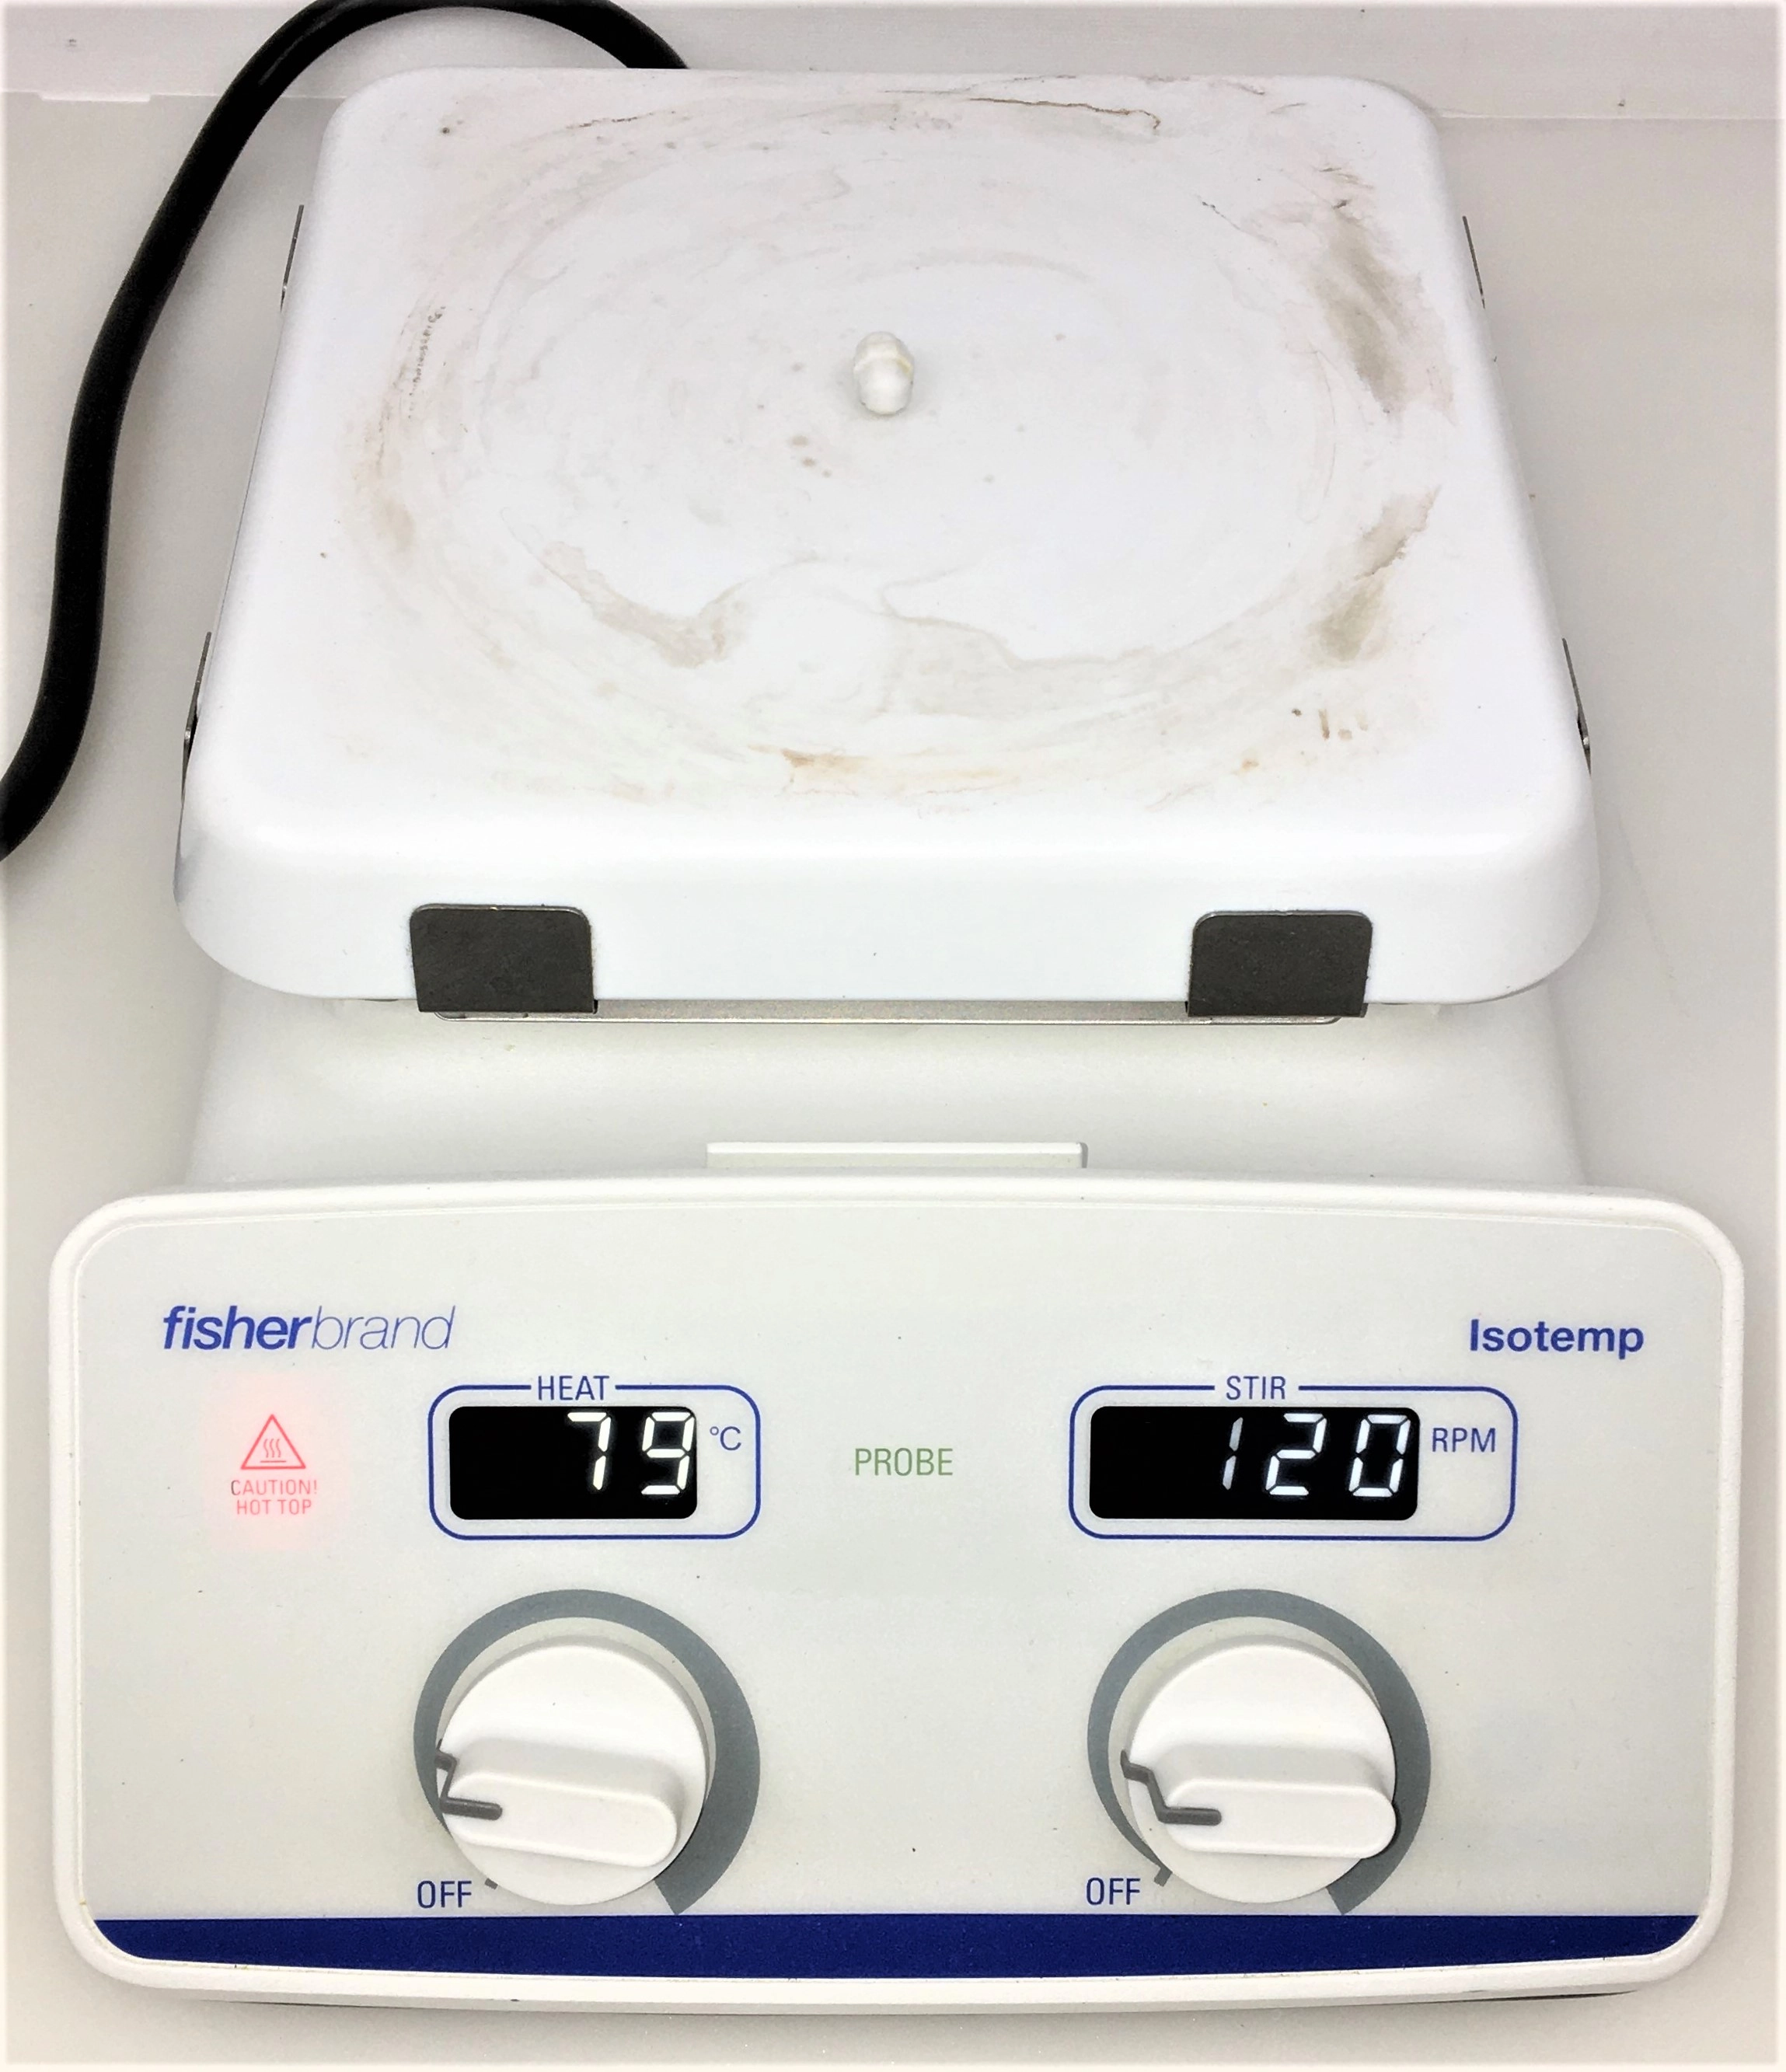 Used Sold Thermo Scientific Type 2200 (HPA2245M) Hot Plate - 24 x